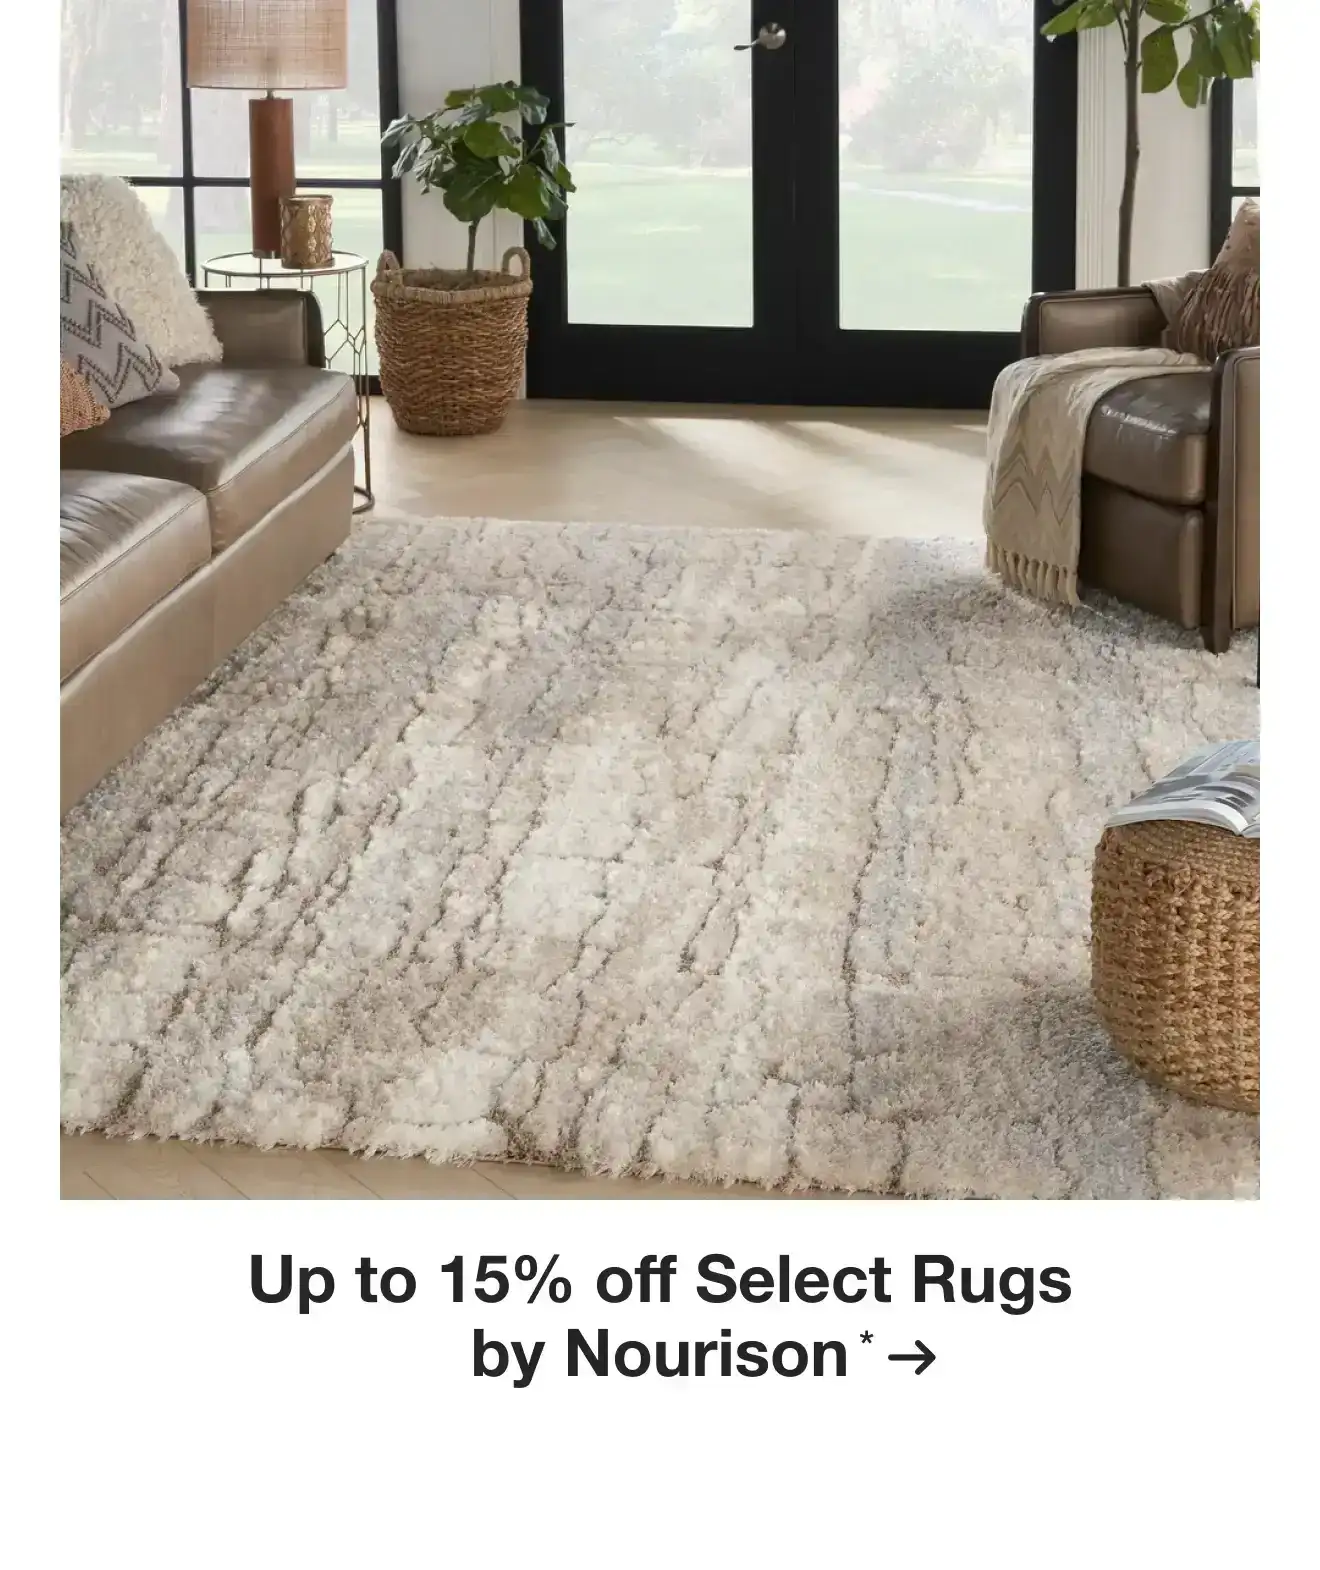 Up to 15% off Select Rugs by Nourison*